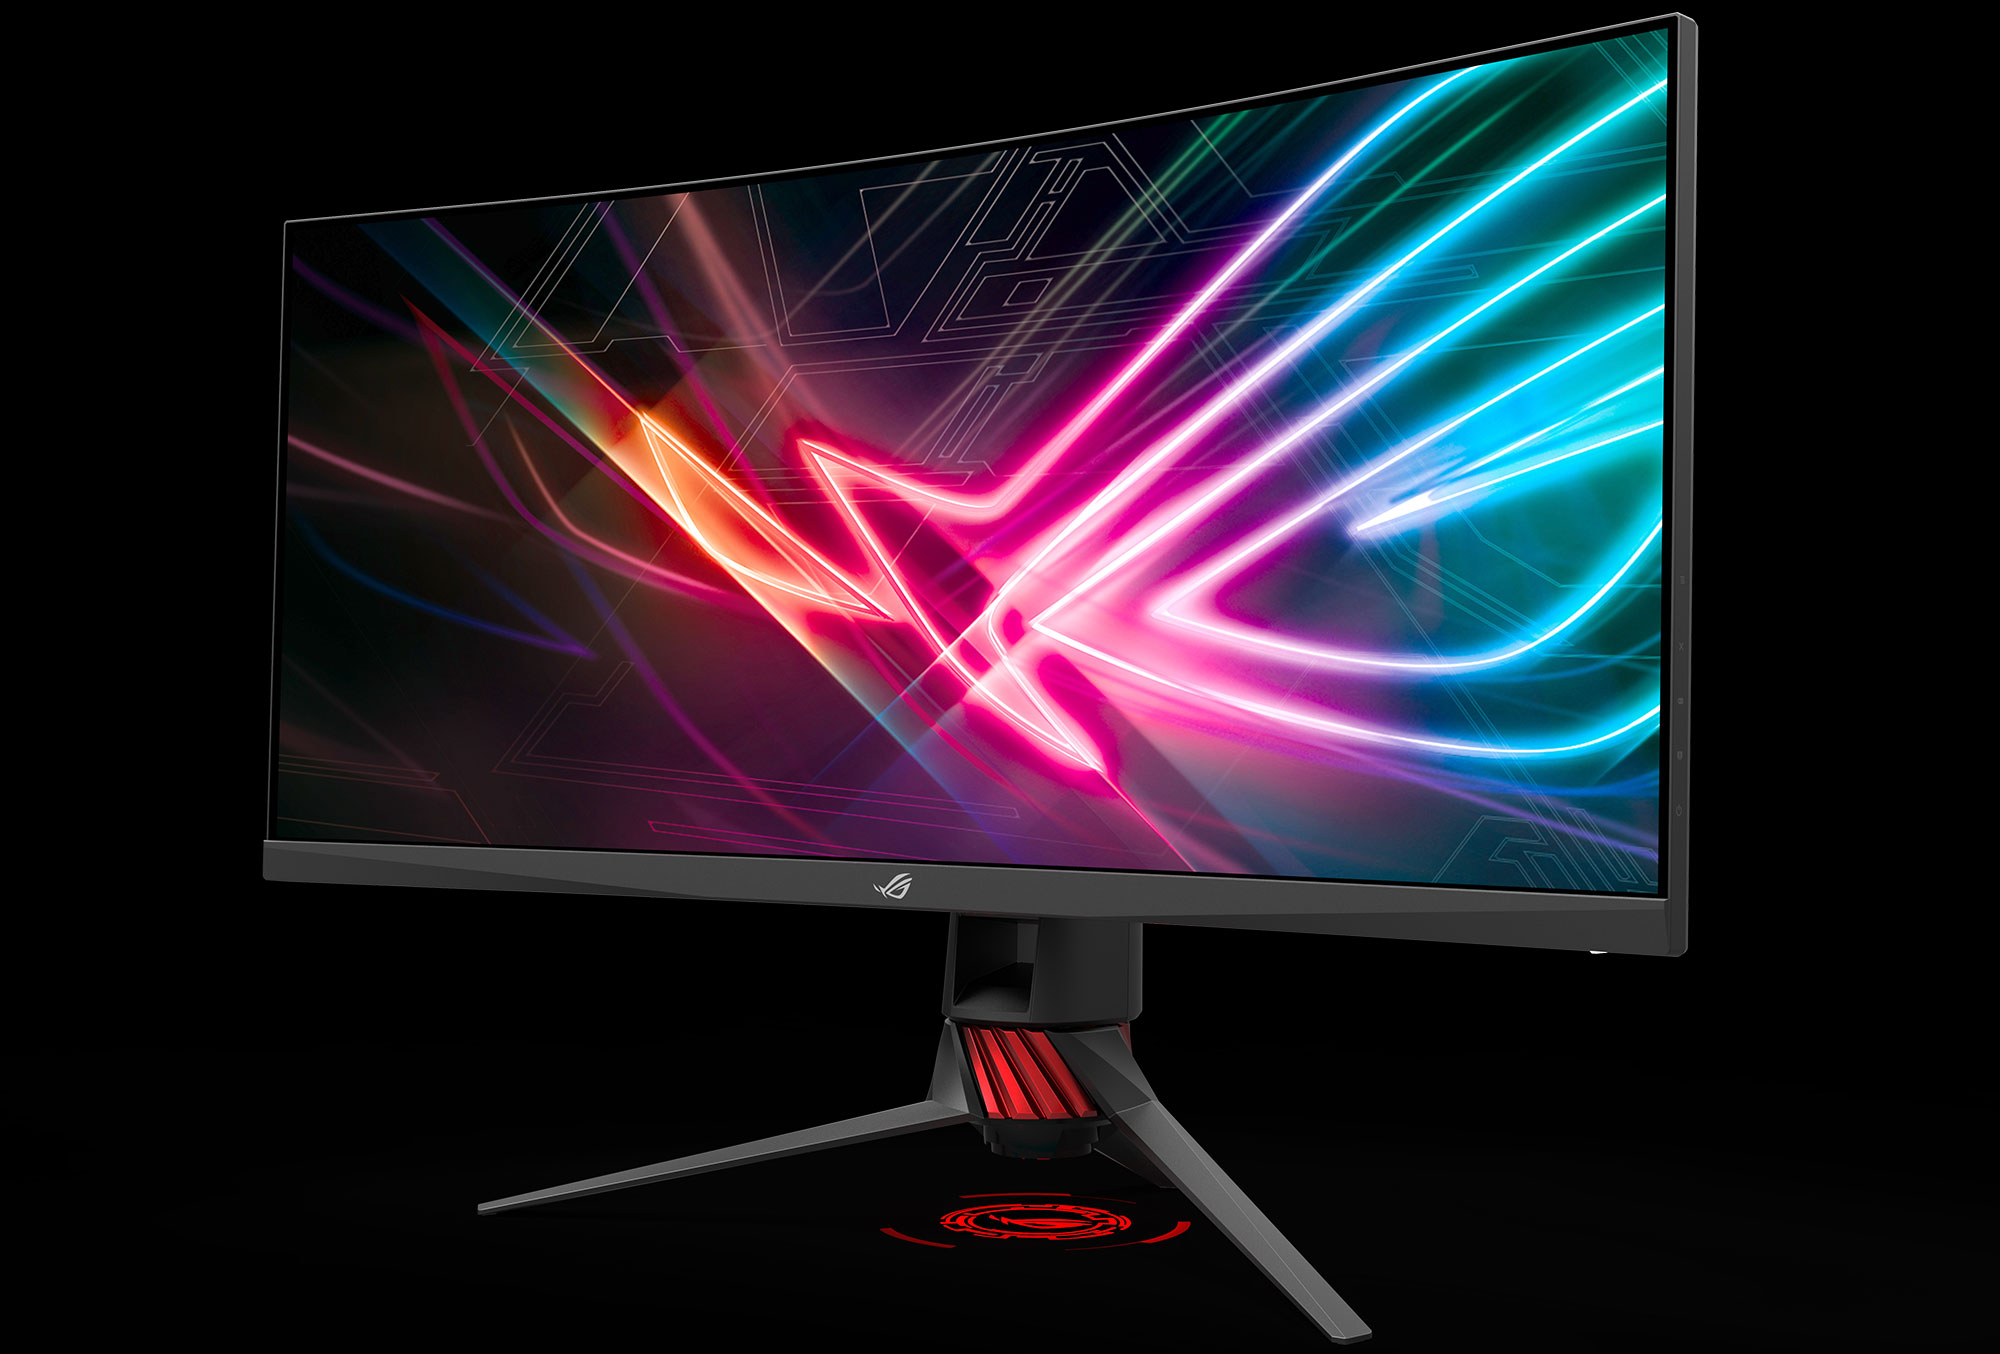 The 35” ROG Strix XG35VQ takes Adaptive-Sync to 100Hz on an ultra-wide curve